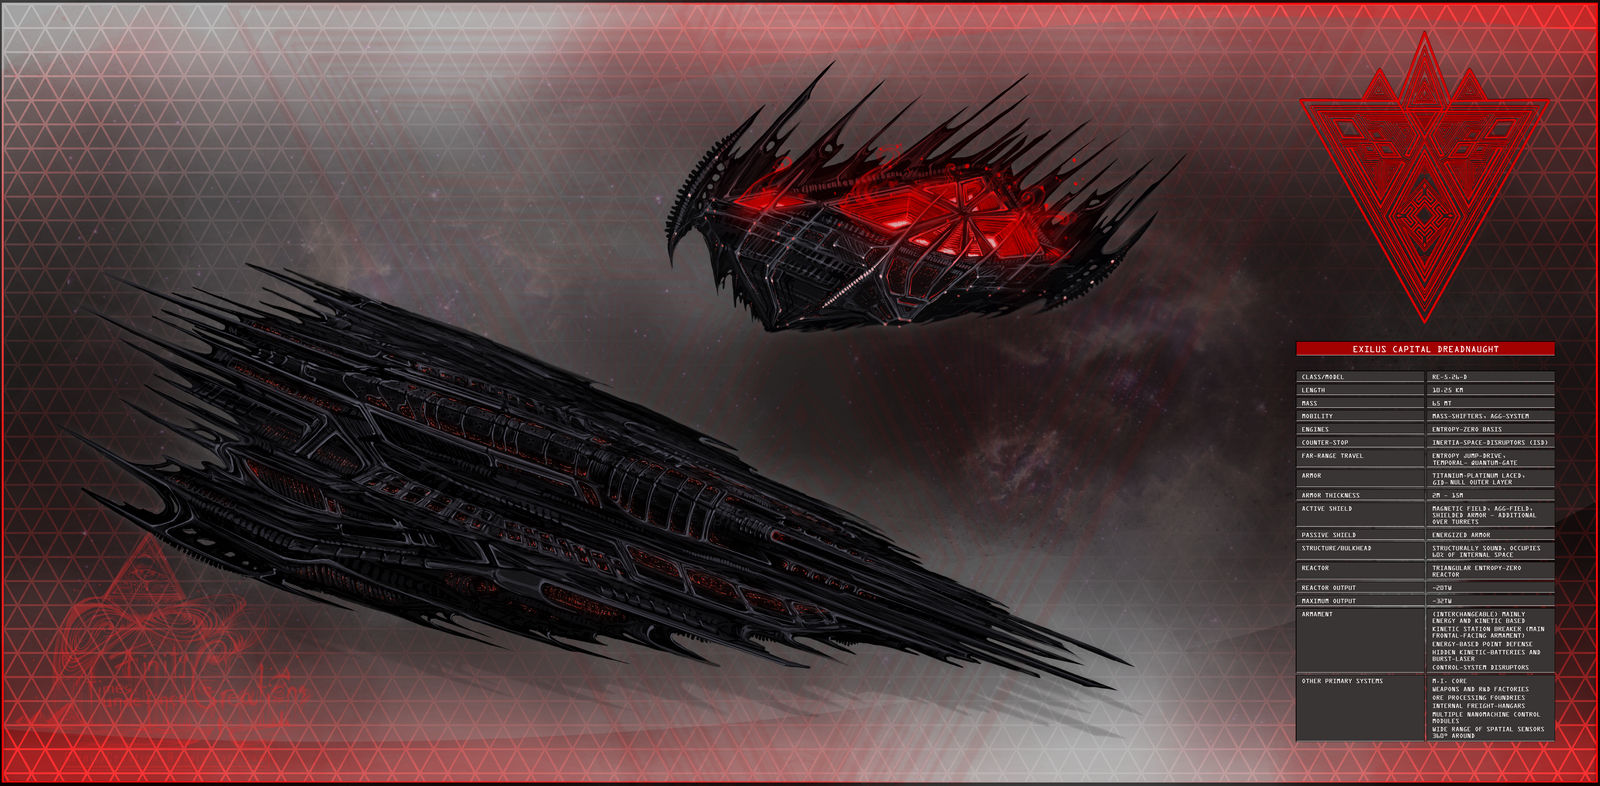 exilus_capital_dreadnaught_____reference_by_8i_ll_ion_de790vm-fullview.jpg